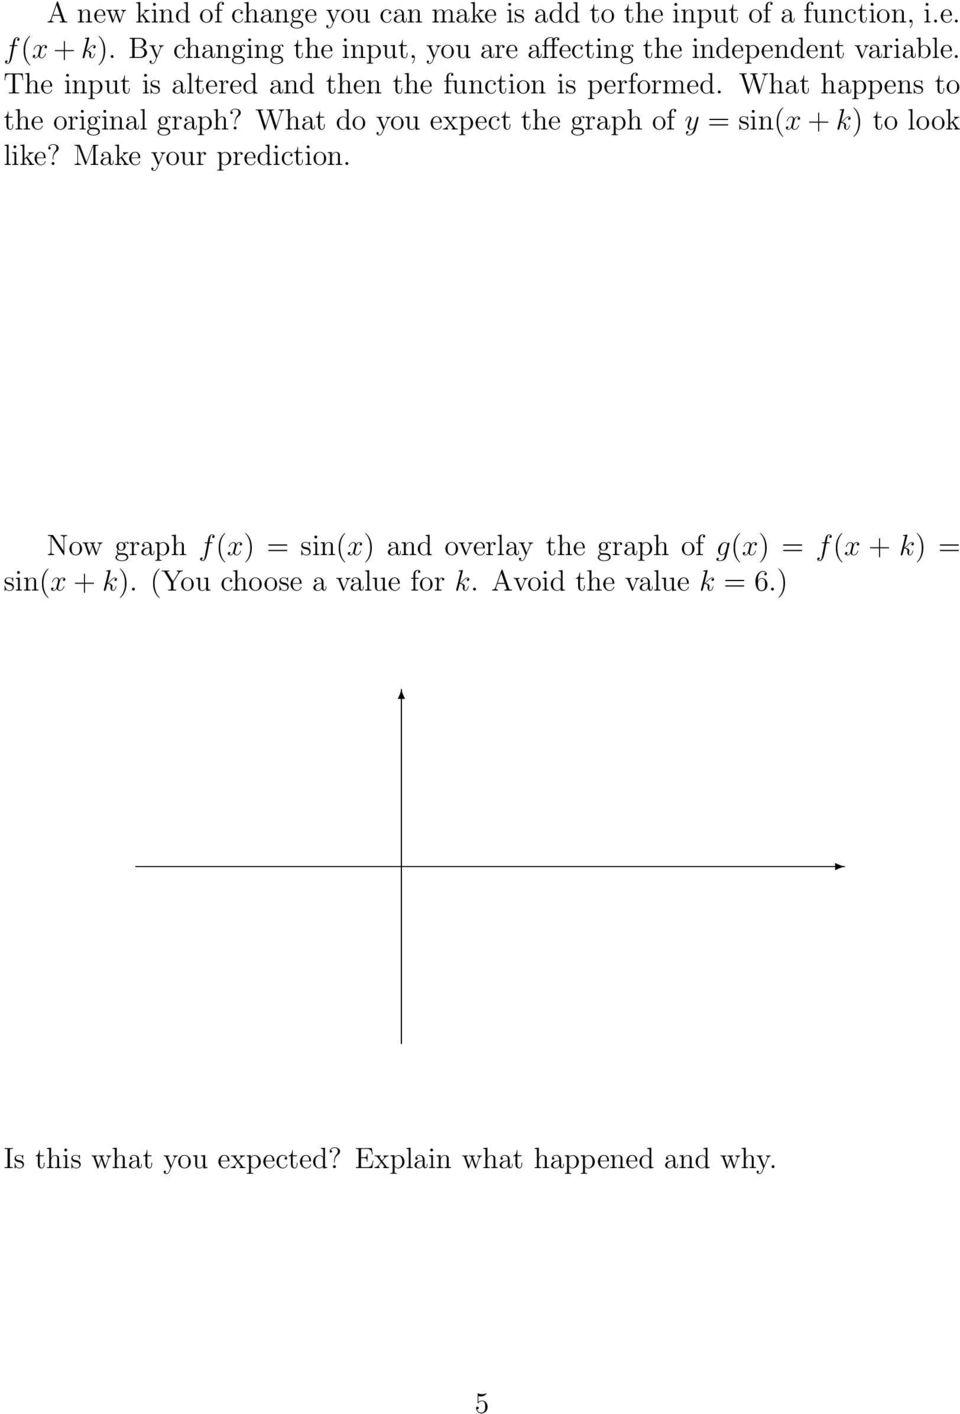 What happens to the original graph? What do you expect the graph of y = sin(x + k) to look like? Make your prediction.